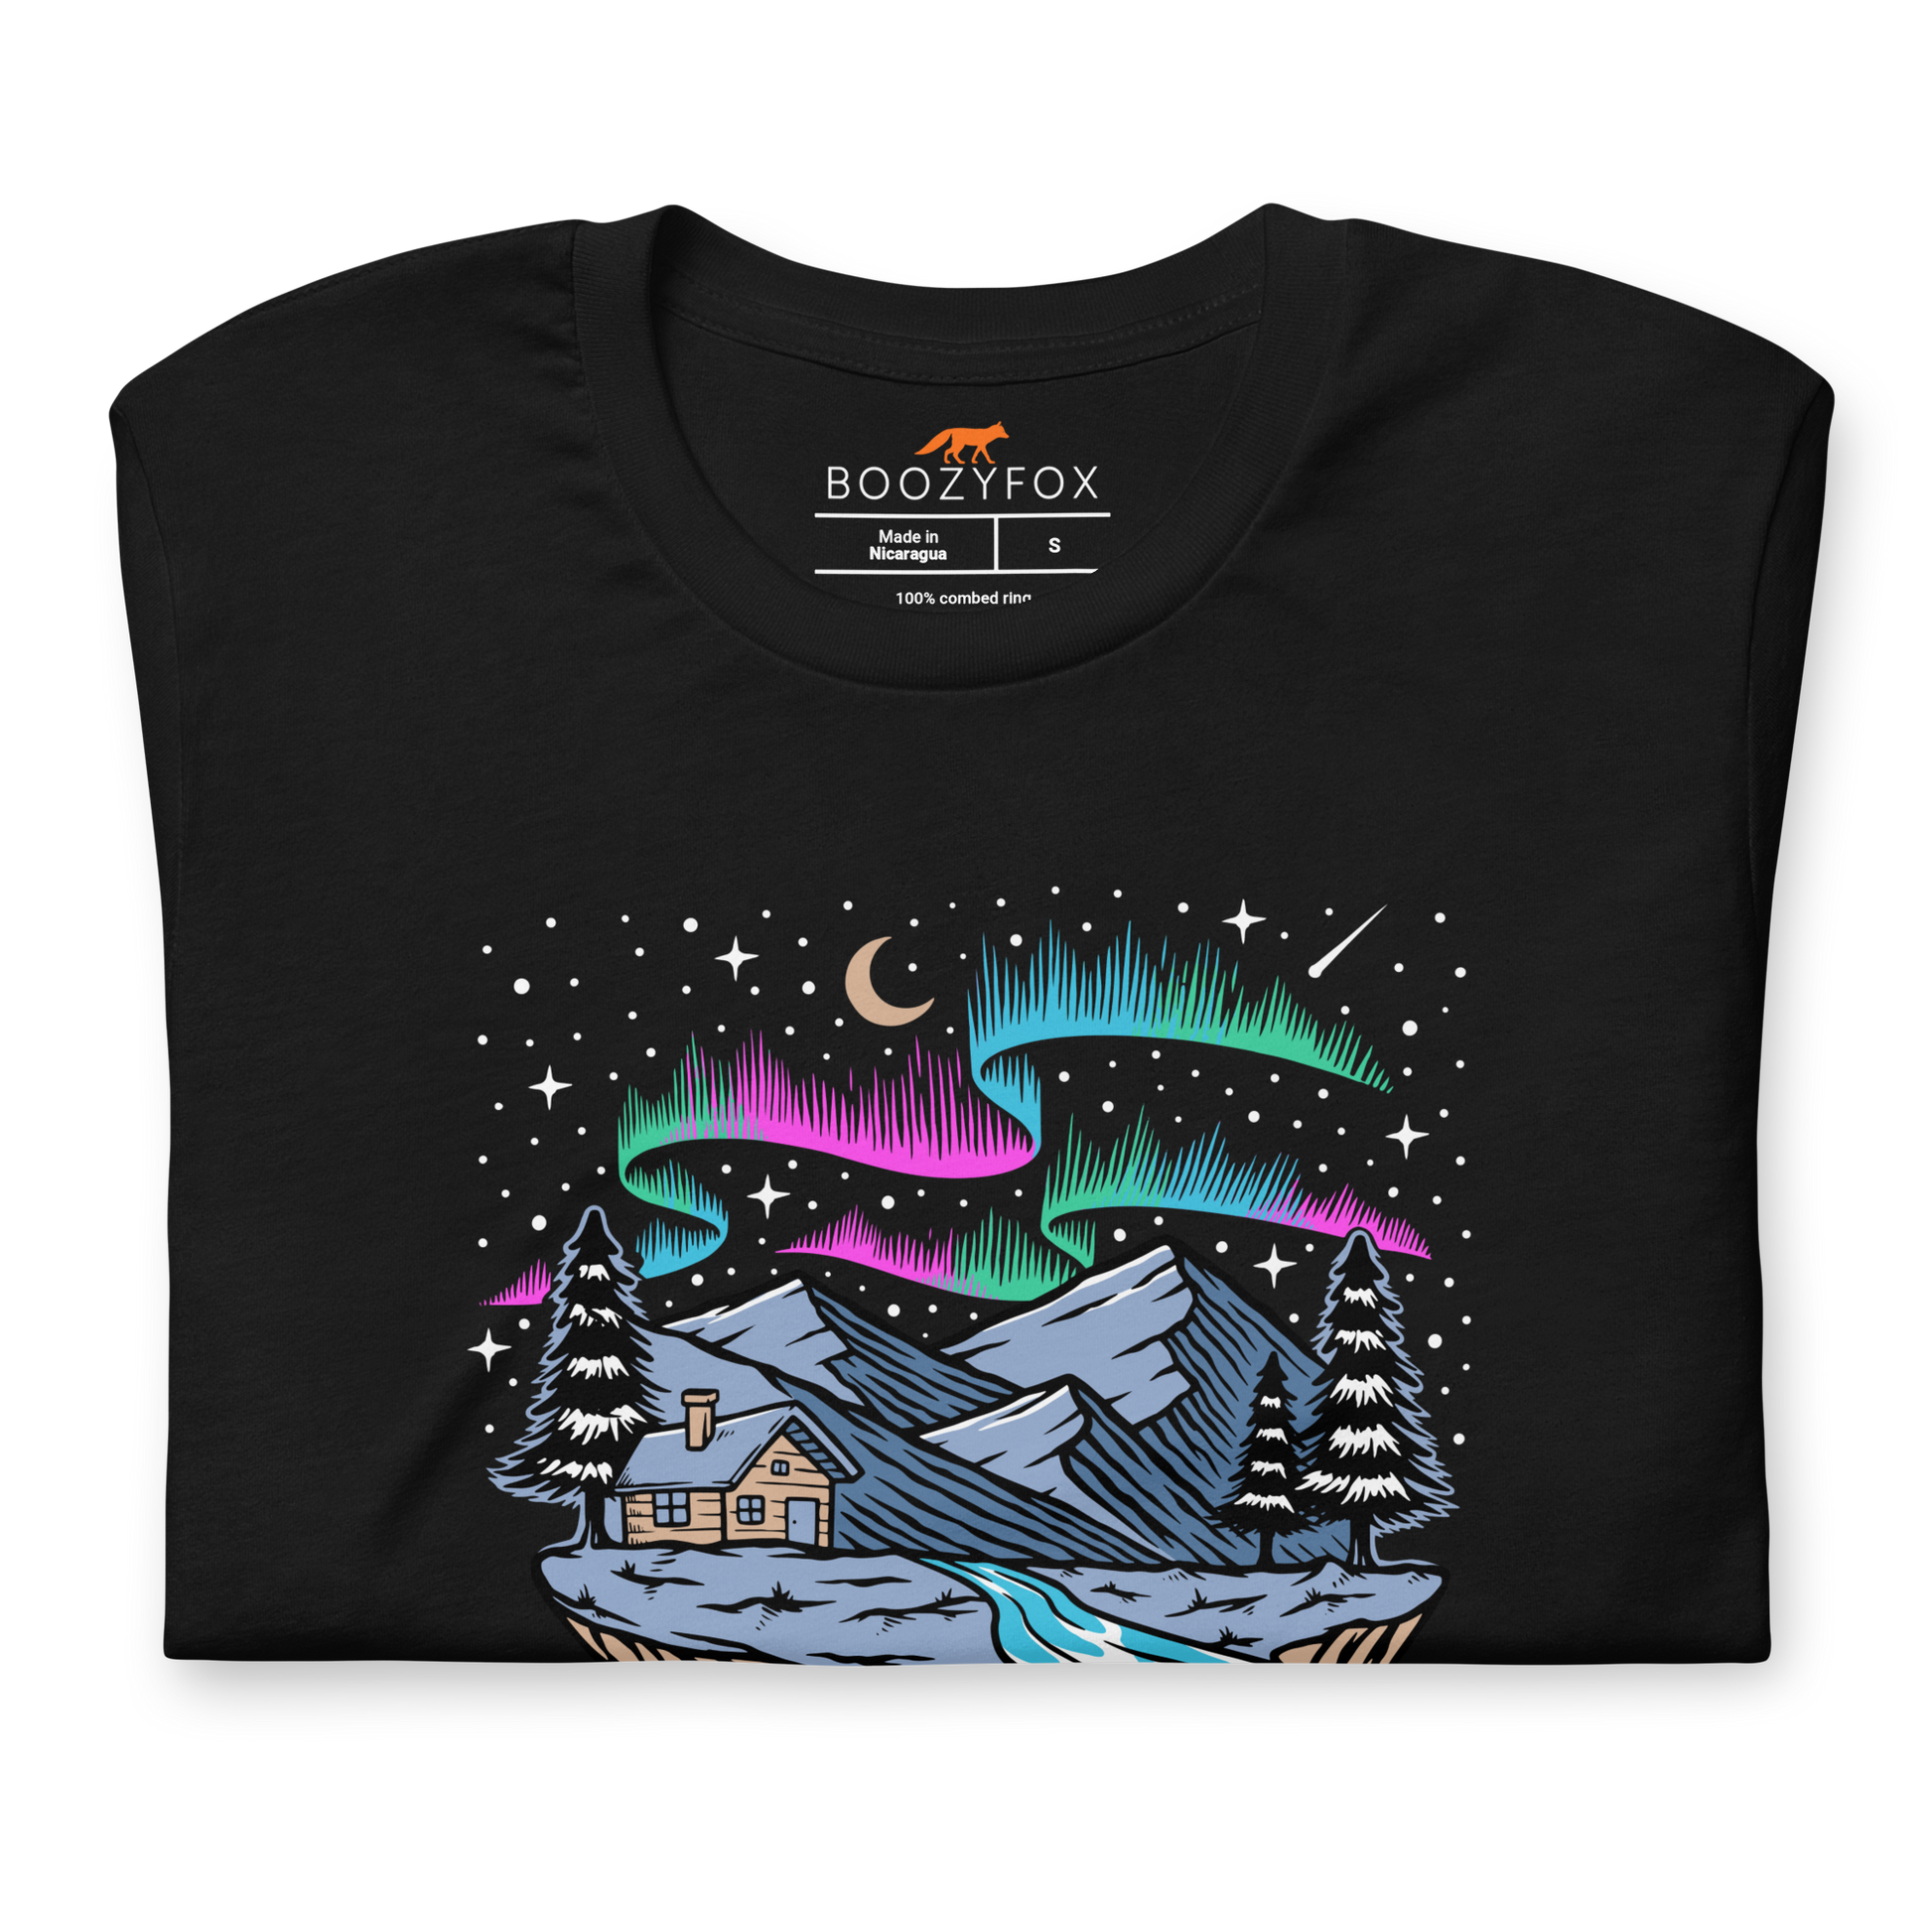 Front details of a Black Premium Let's Get Lost Tee featuring a mesmerizing night sky, adorned with stars and aurora borealis graphic on the chest - Cool Graphic Northern Lights Tees - Boozy Fox